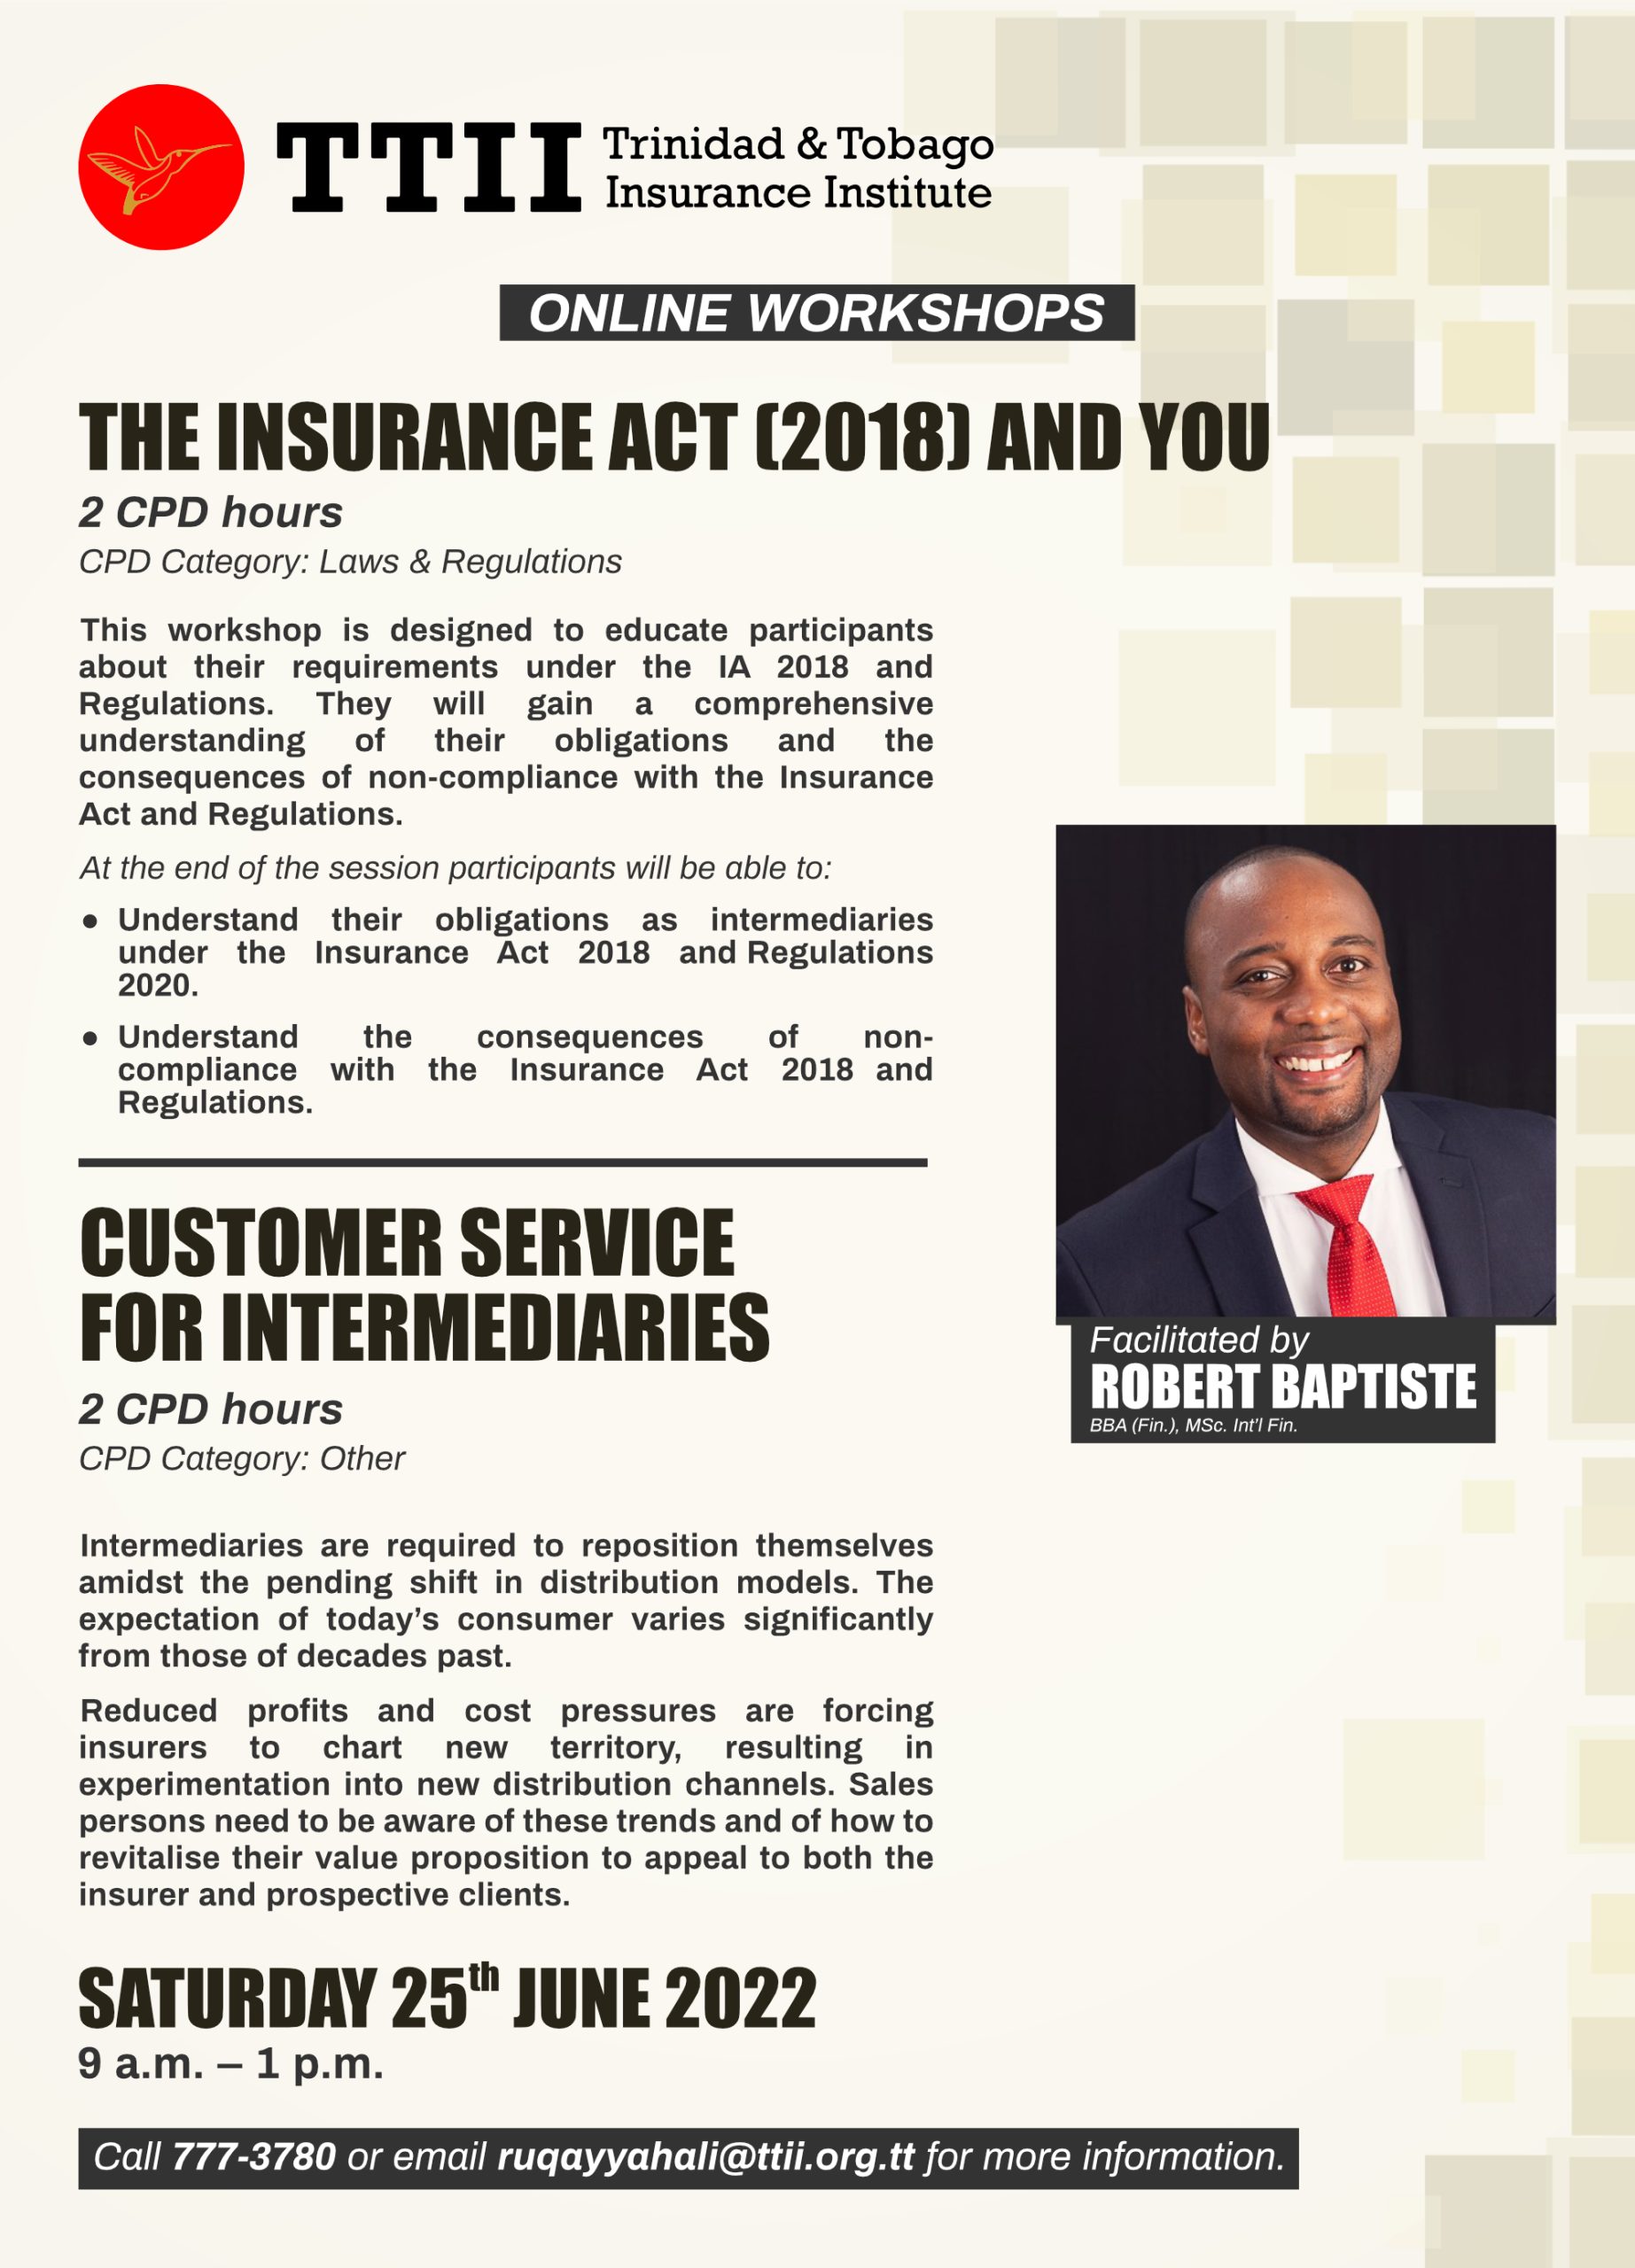 The Insurance Act 2018 & You and Customer Service for Intermediaries